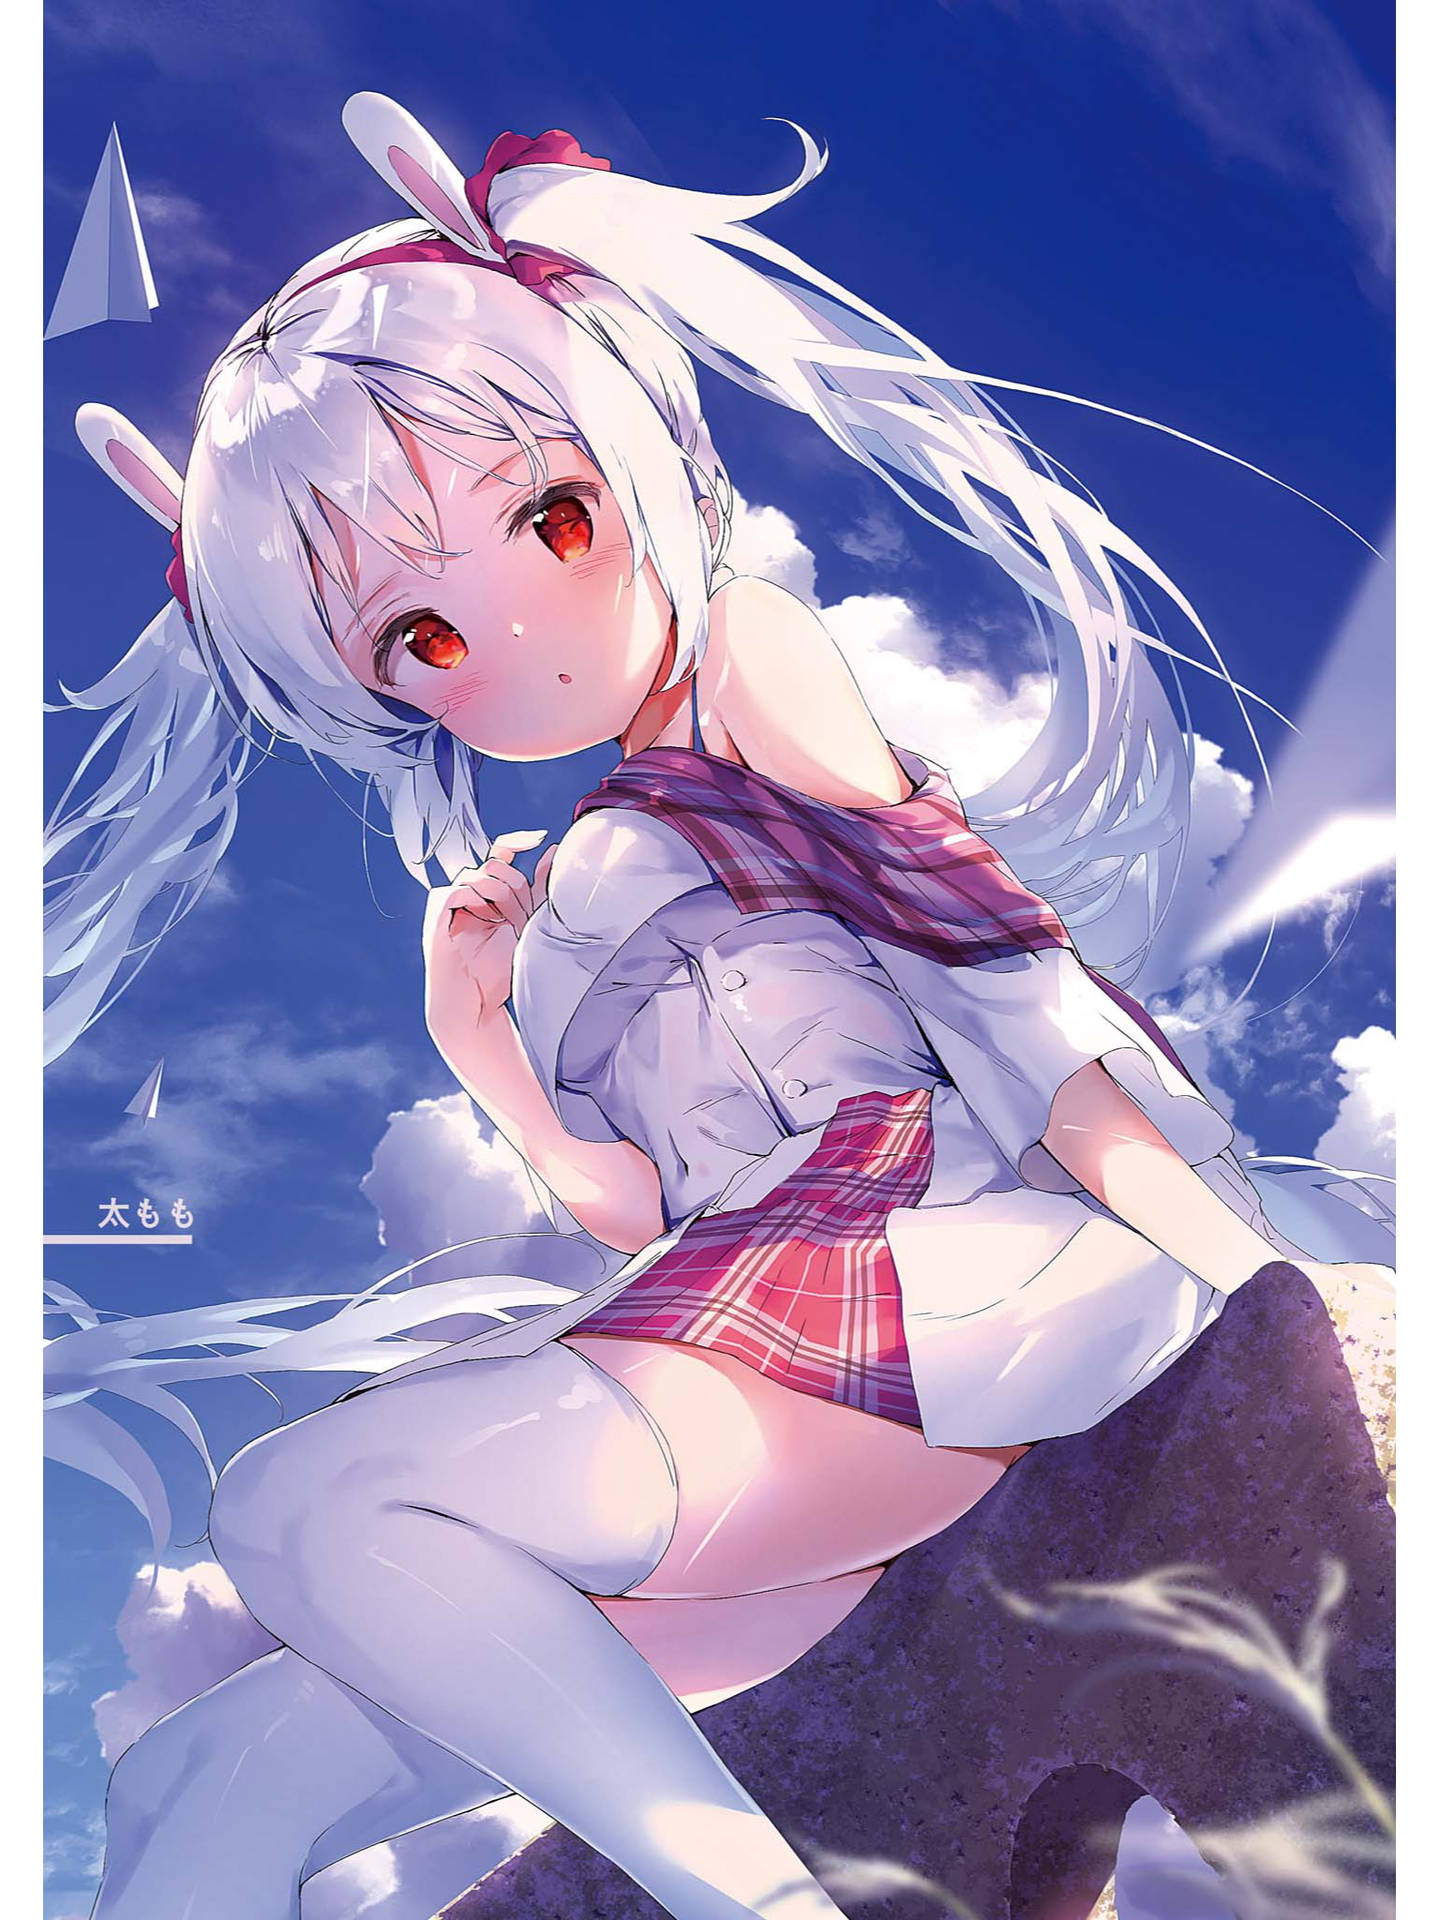 “The Unstoppable Laffey at the Blue Skies” Wallpaper